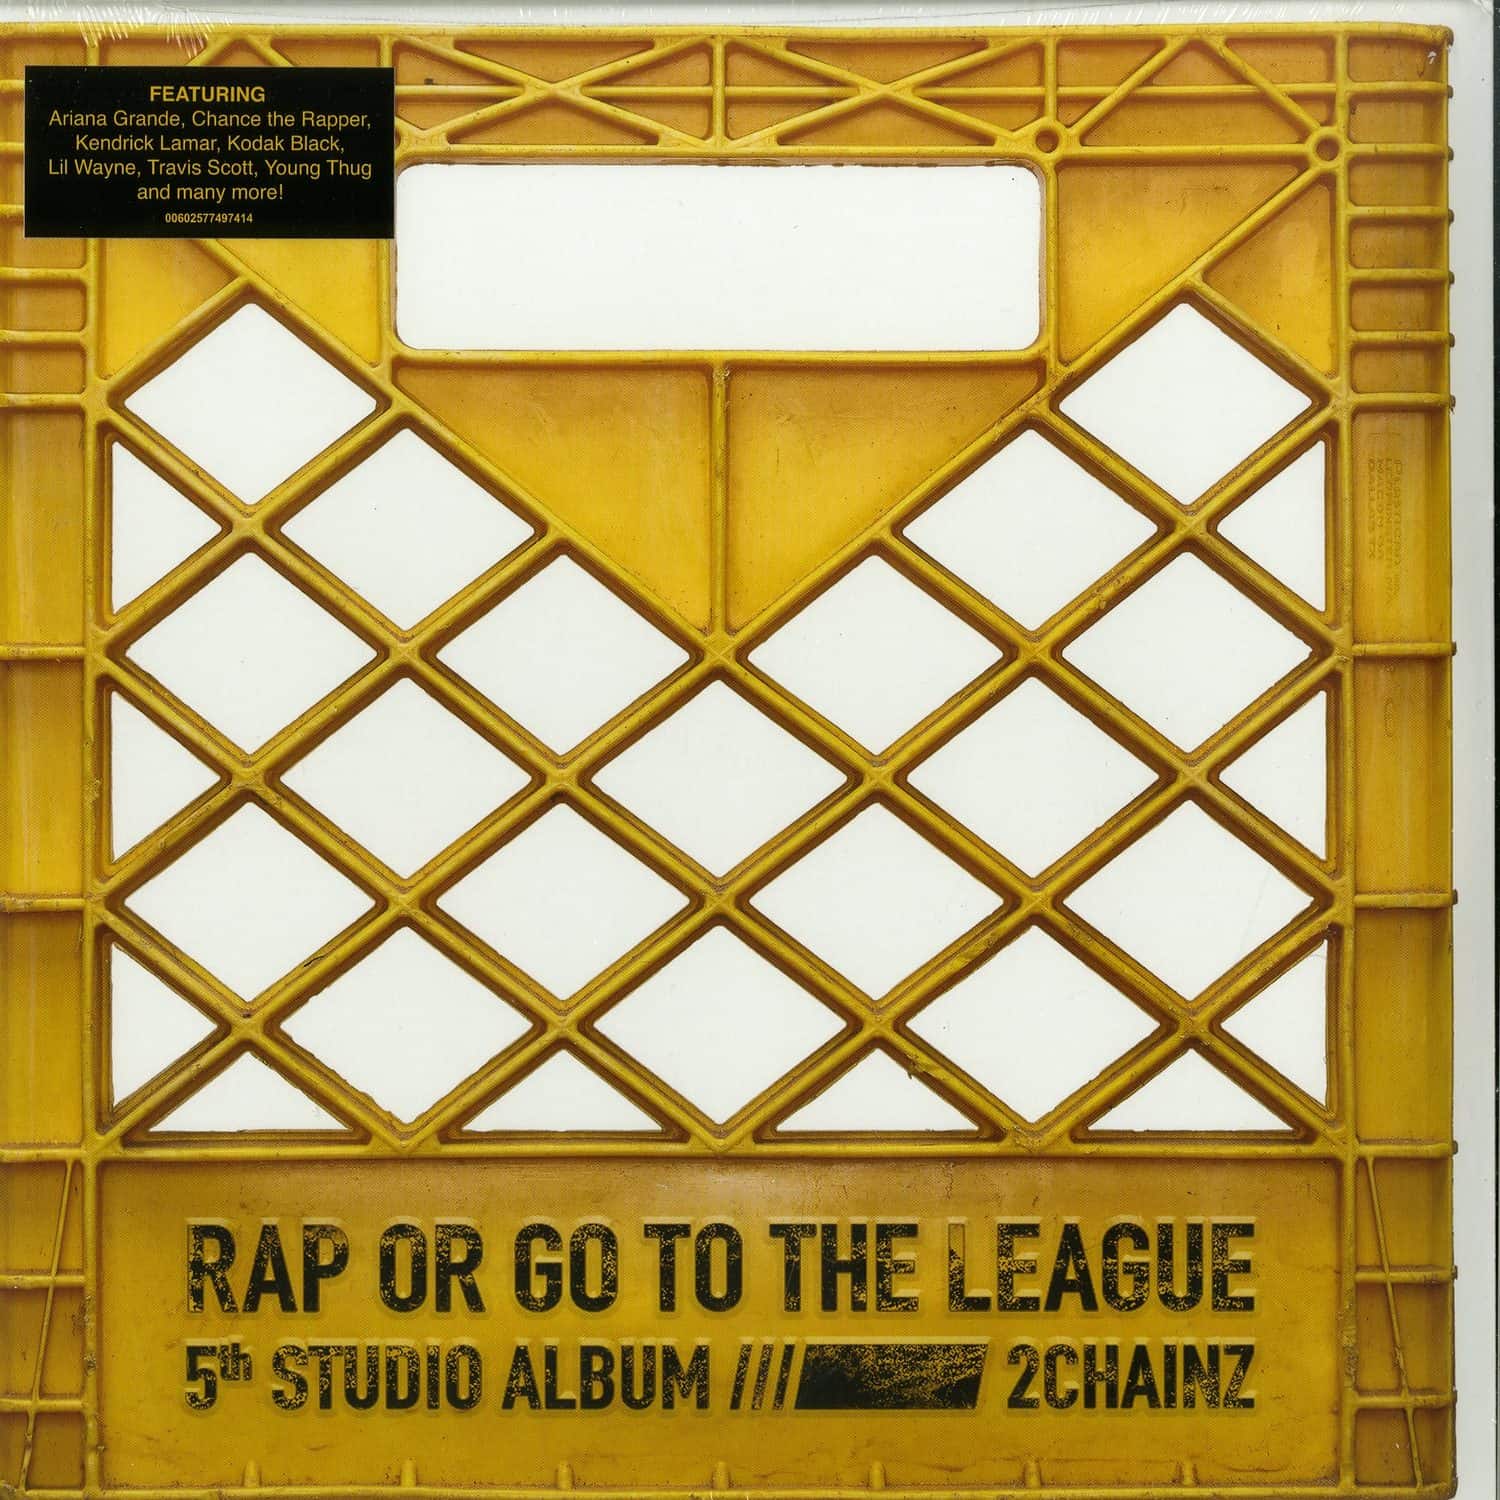 2 Chainz - RAP OR GO TO THE LEAGUE 